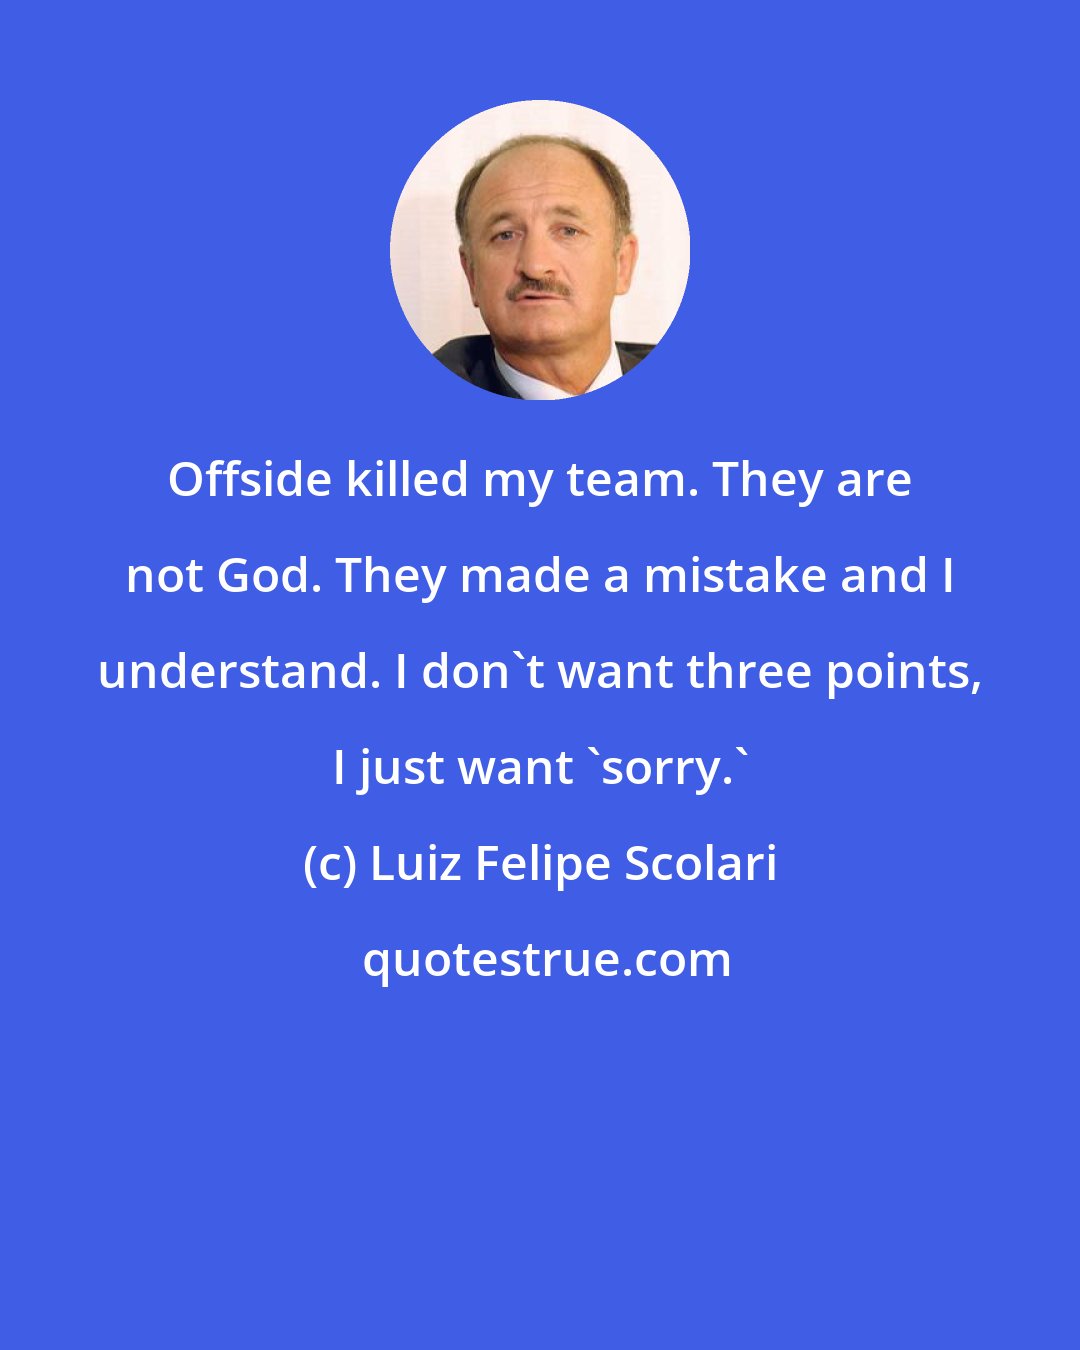 Luiz Felipe Scolari: Offside killed my team. They are not God. They made a mistake and I understand. I don't want three points, I just want 'sorry.'